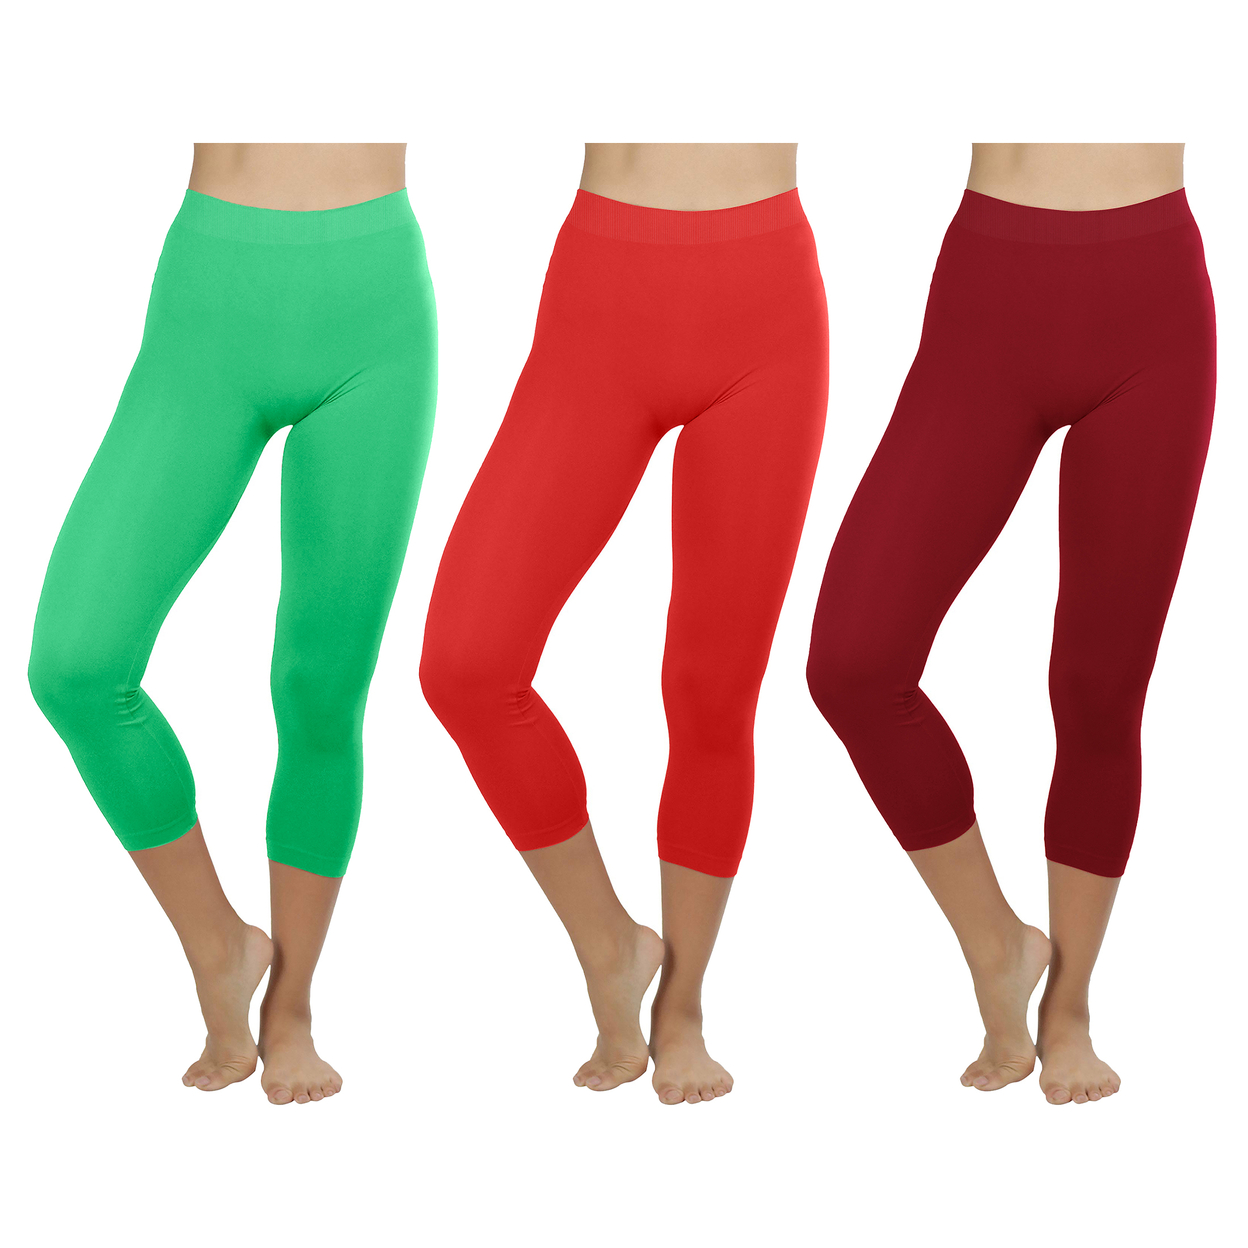 2-Pack: Women's Ultra-Soft High Waisted Smooth Stretch Active Yoga Capri Leggings - Red & Red, Large